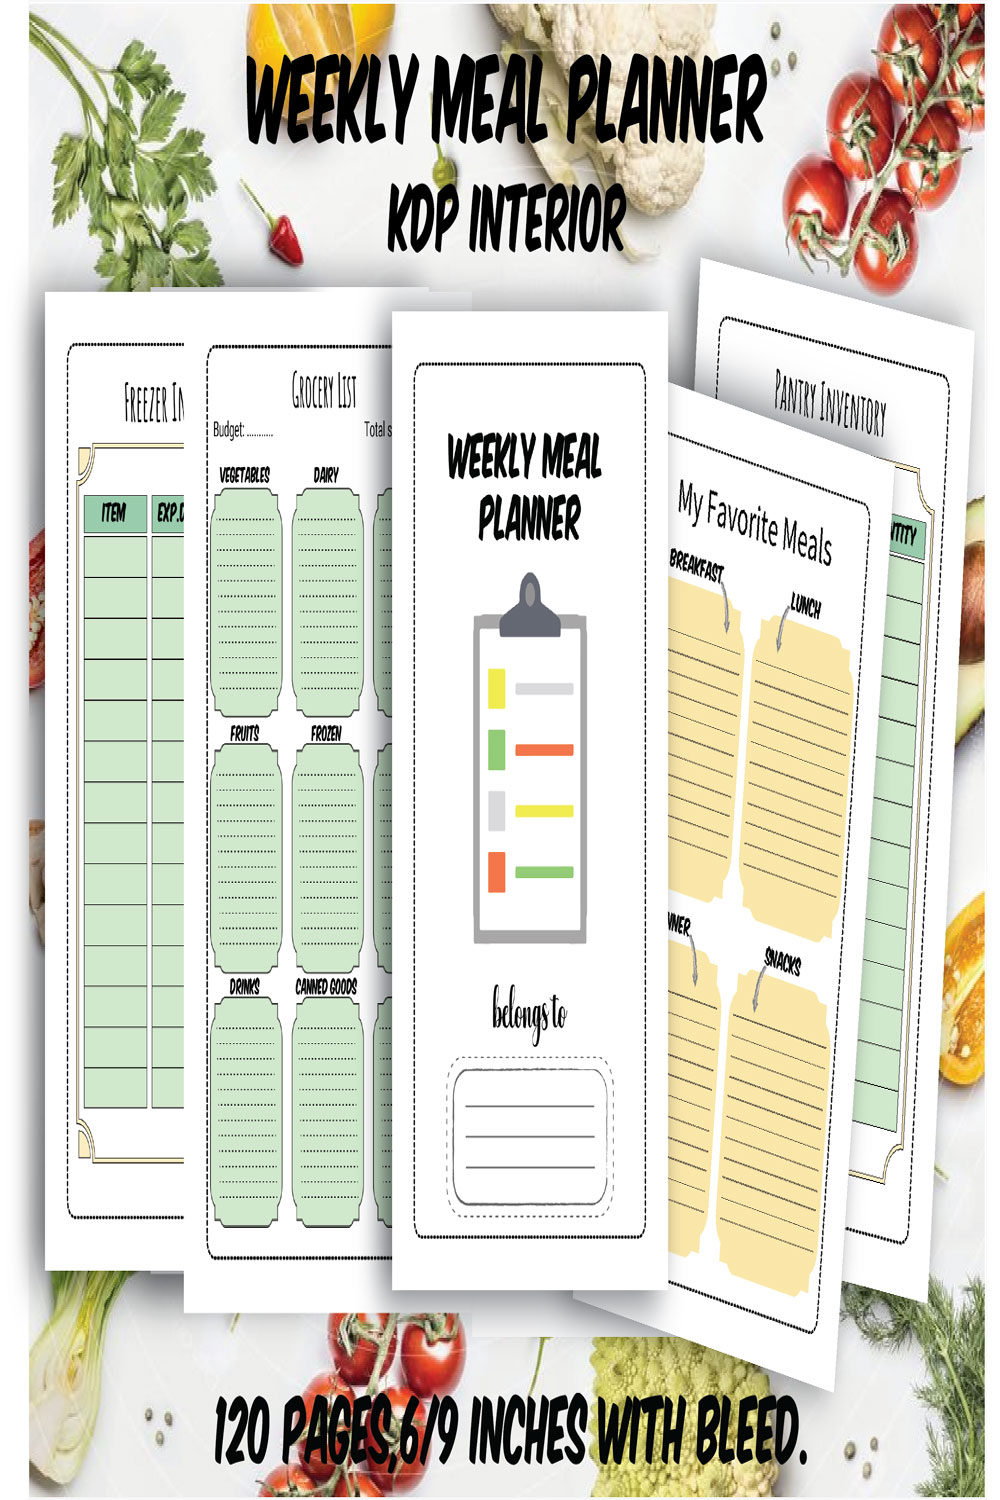 Weekly Meal planner pinterest preview image.